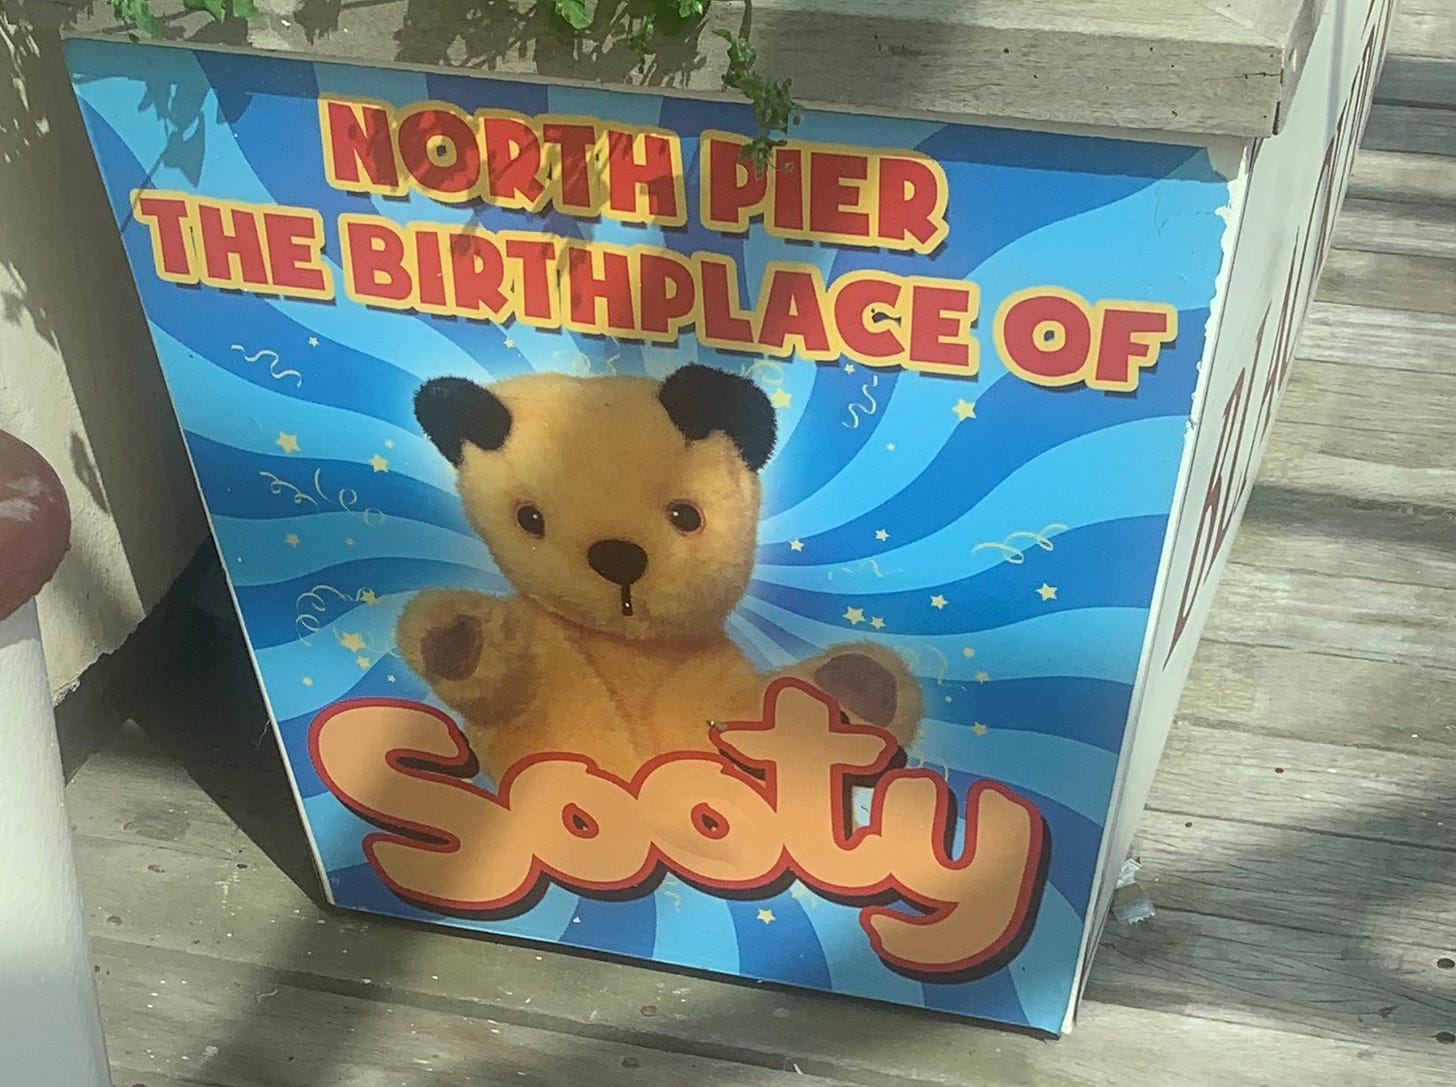 Picture of Sooty with a swirly blue background. Text reads: "North Pier, the birthplace of Sooty"